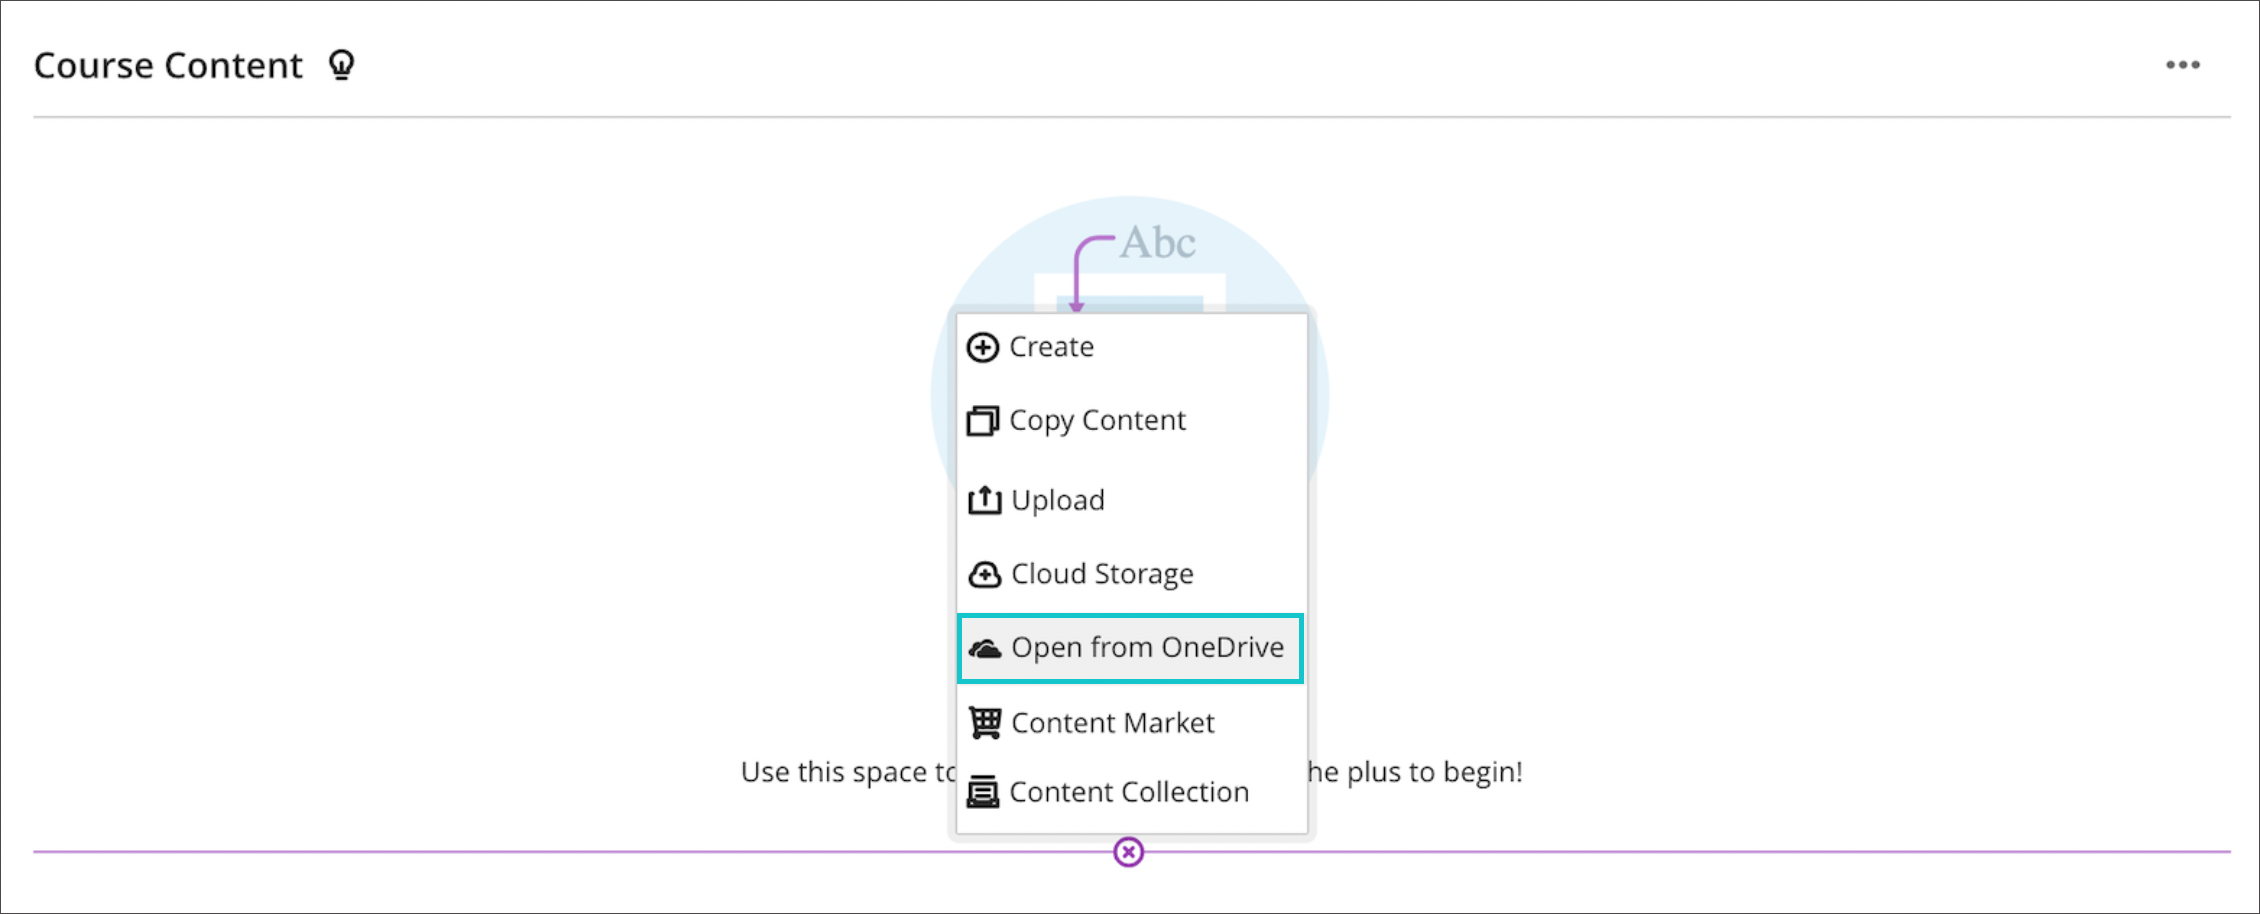 Learn Ultra add file by open it from OneDrive using the plus sign menu in the Course Content page